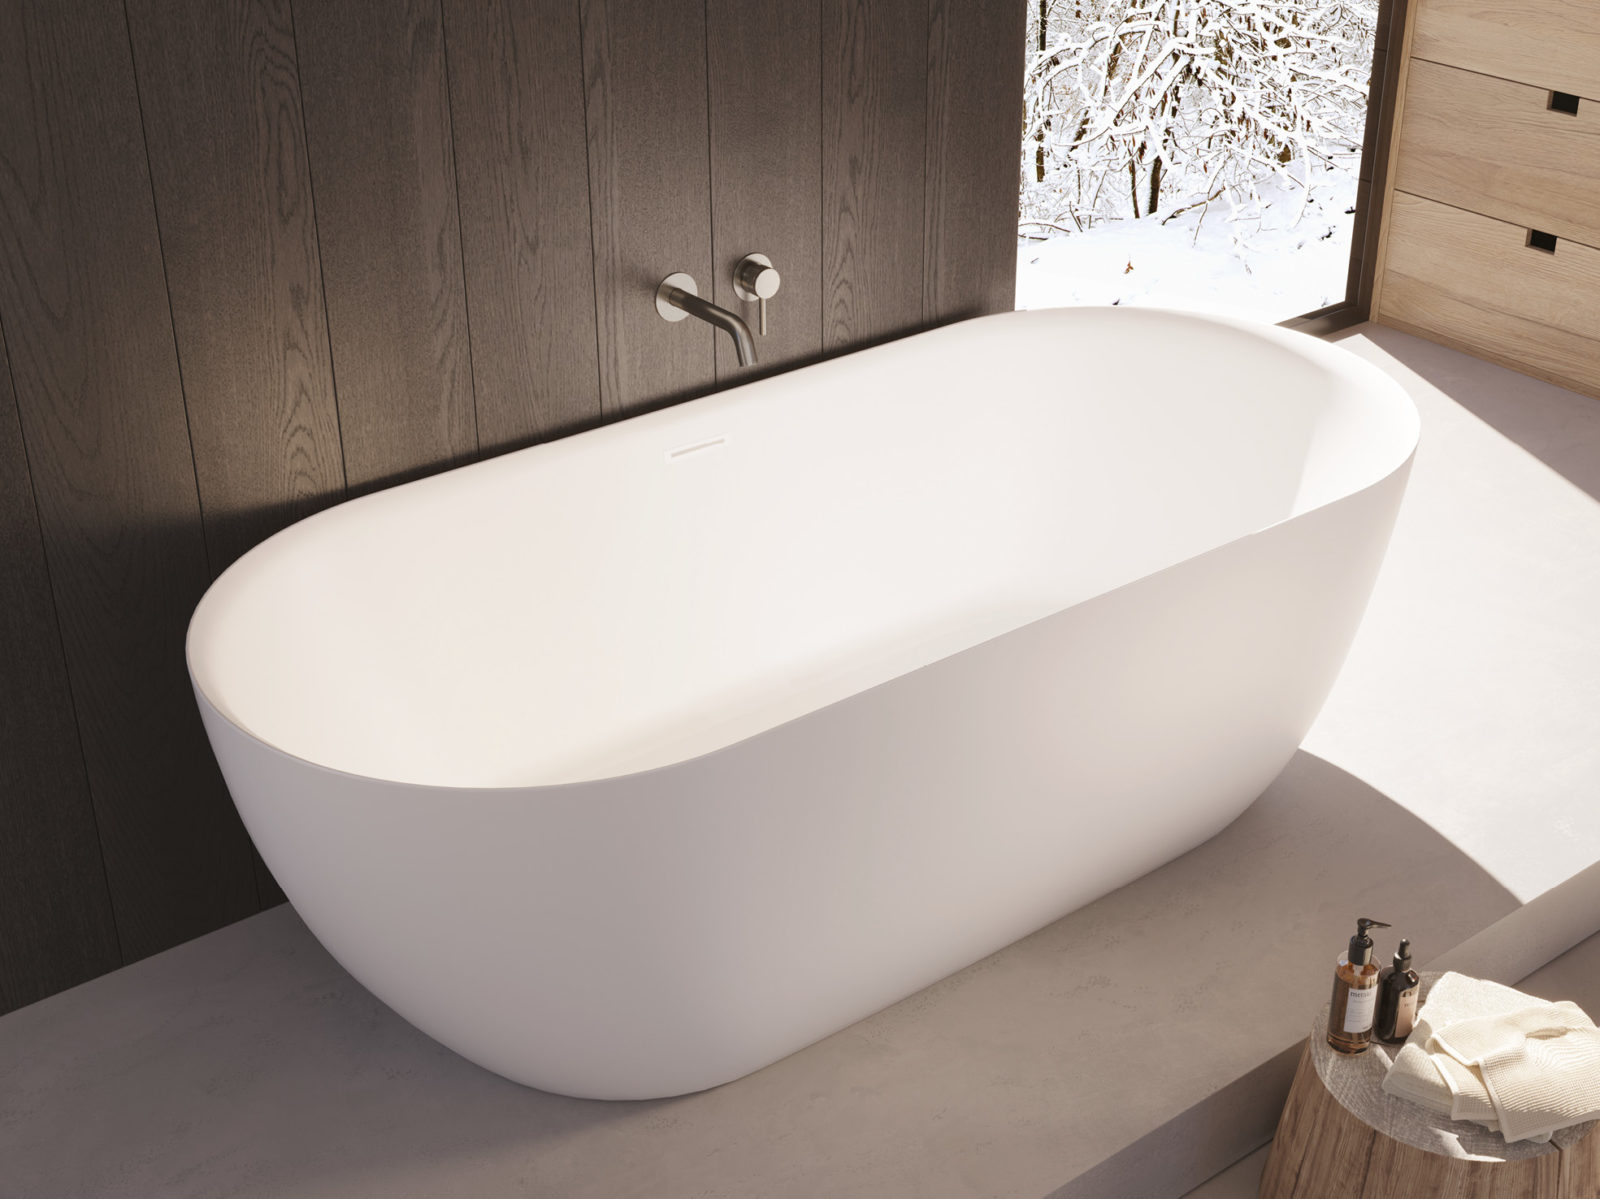 Acrylic Bathtub Market Investment Opportunities in the Retail Industry: A Comprehensive Study